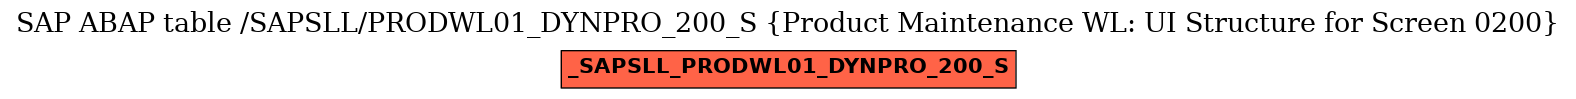 E-R Diagram for table /SAPSLL/PRODWL01_DYNPRO_200_S (Product Maintenance WL: UI Structure for Screen 0200)